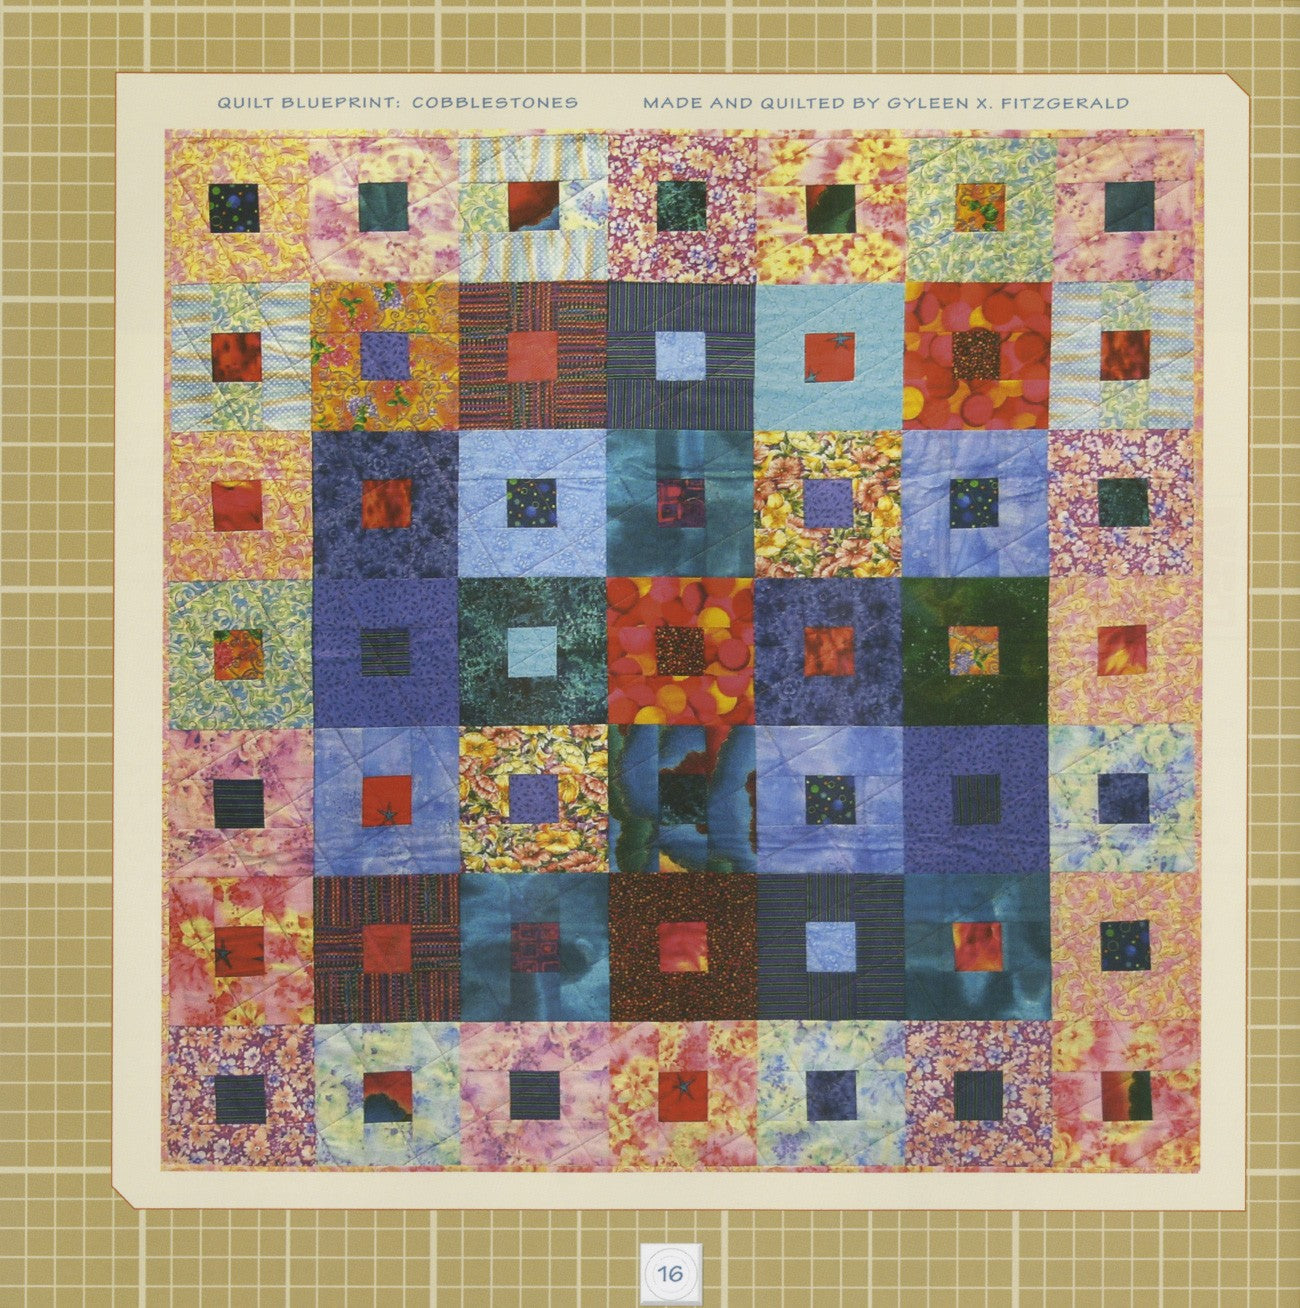 Bricks, Cobblestones and Pebbles Quilt Pattern Book by Gyleen X Fitzgerald of Colourful Stitches